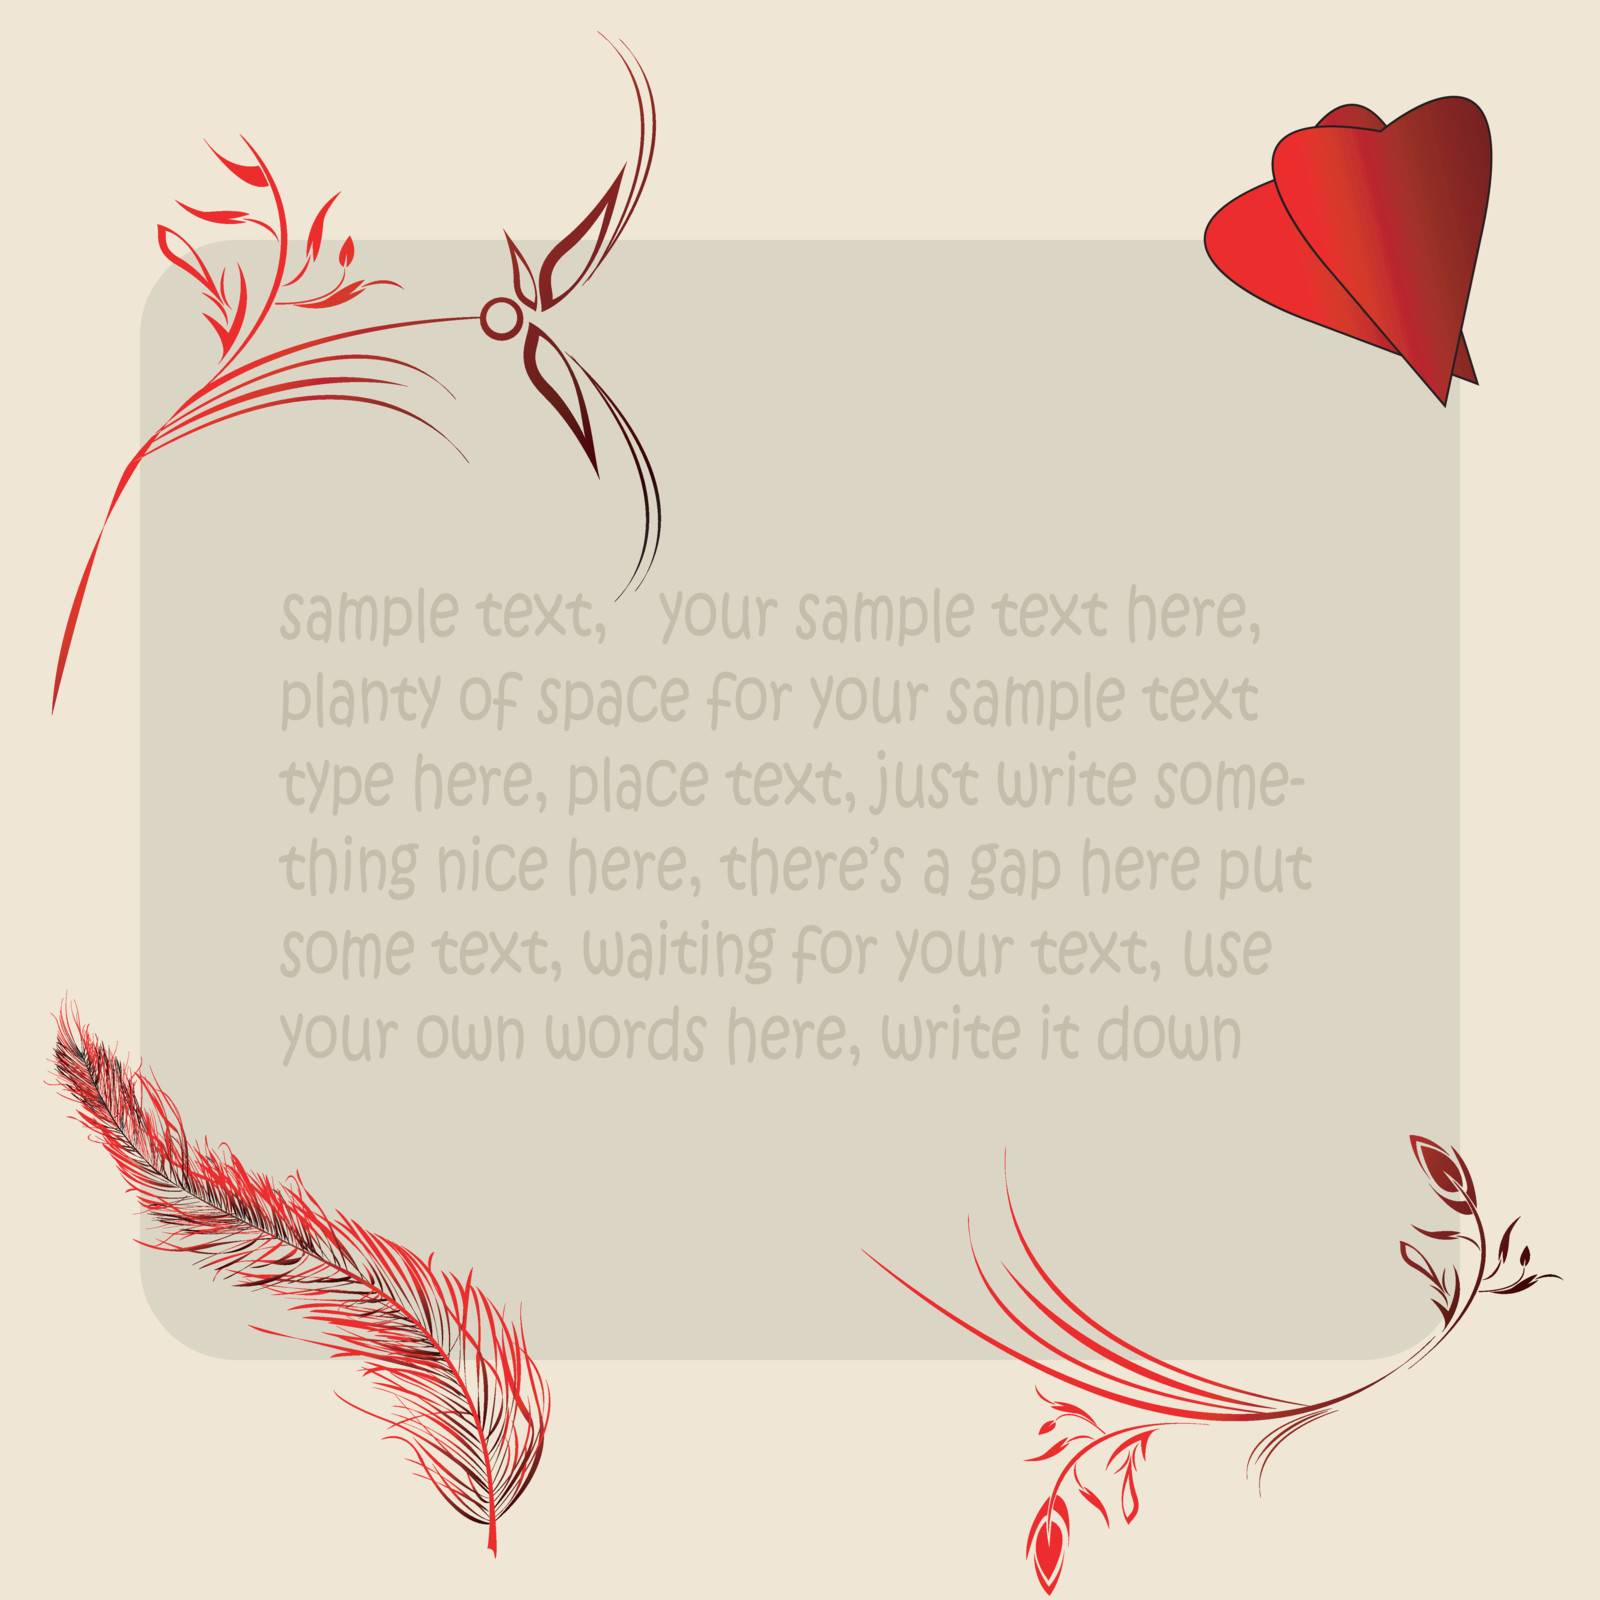 sample text card by Lirch